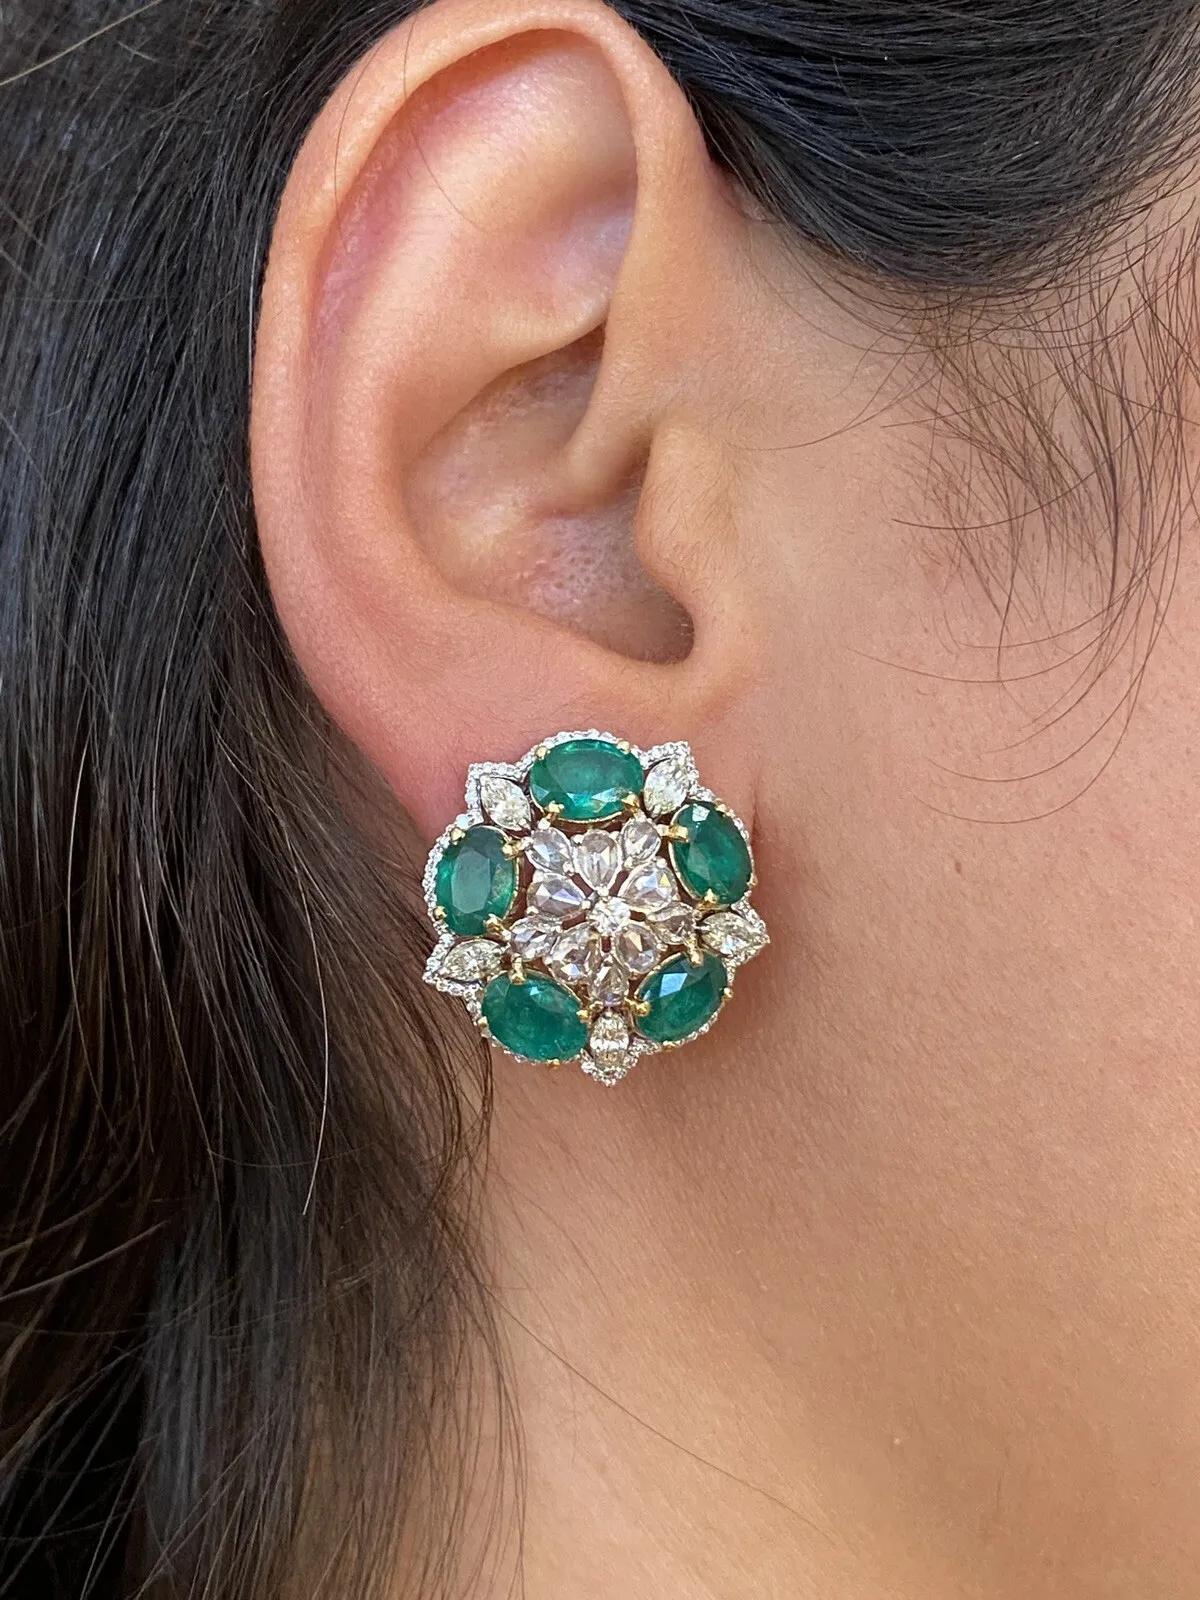 Large Emerald and Diamond Star Design Earrings in 18k White Gold

Emerald and Diamond Earrings features 5 deep green Oval Emeralds in each earring set in circle with Round Brilliants, Marquise and Rose Cut Diamonds set throughout in star pattern in